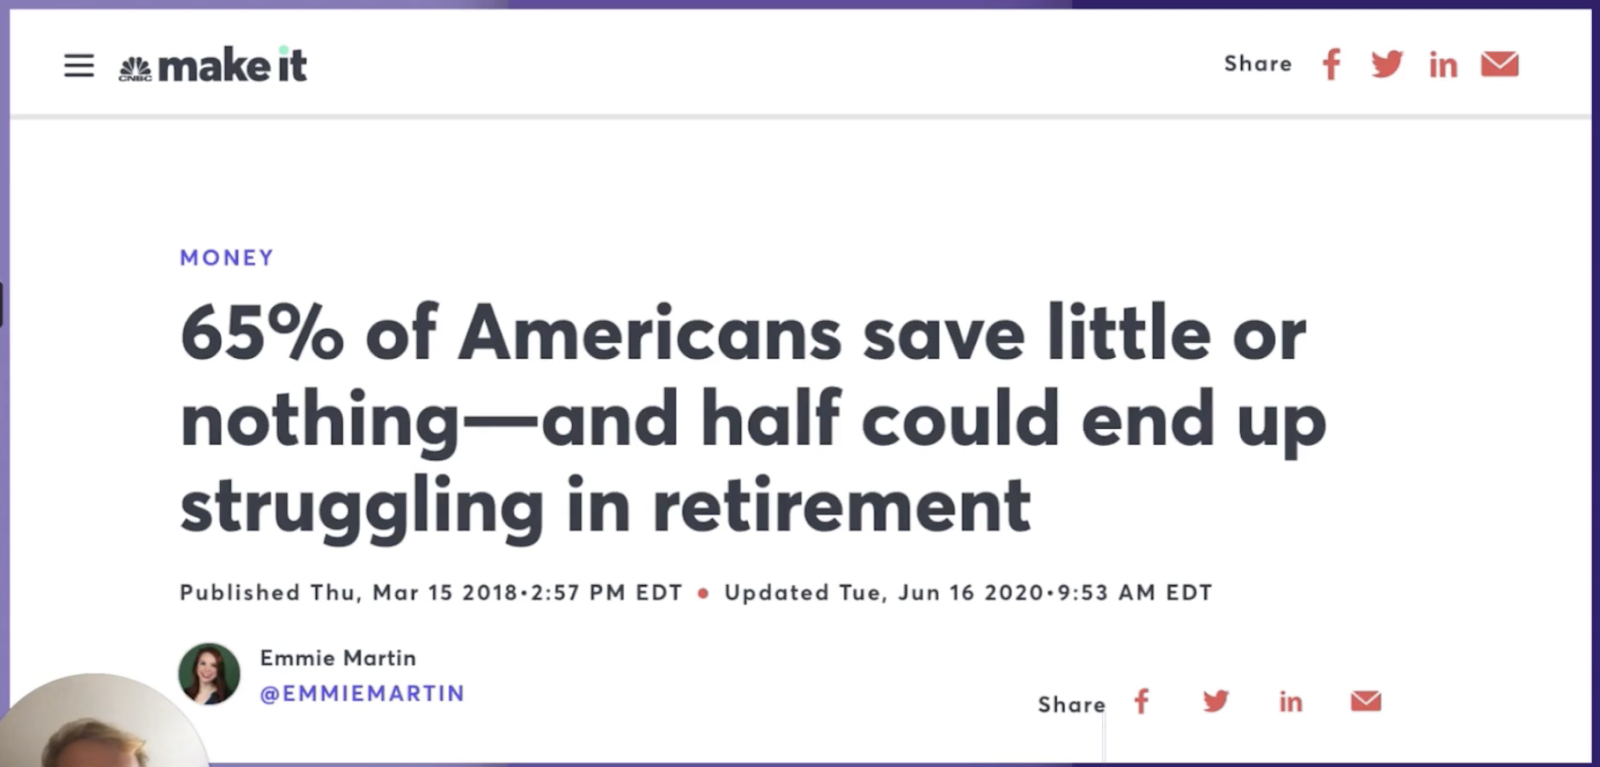 Research has shown 65% of Americans save little, with roughly 50% potentially setting themselves up to struggle in retirement.